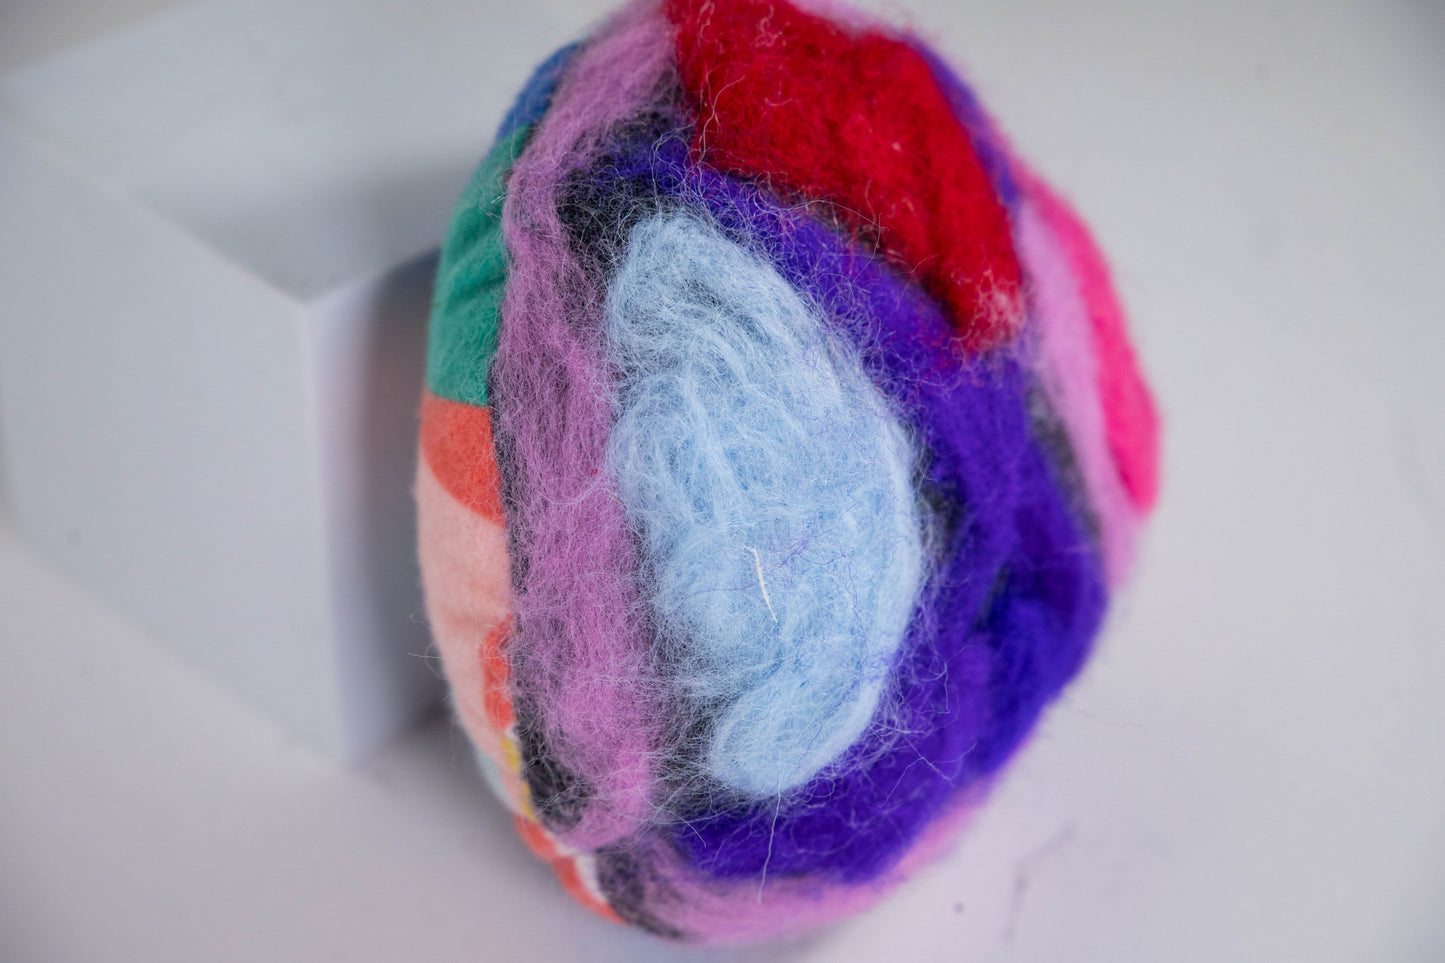 Felted Pillow